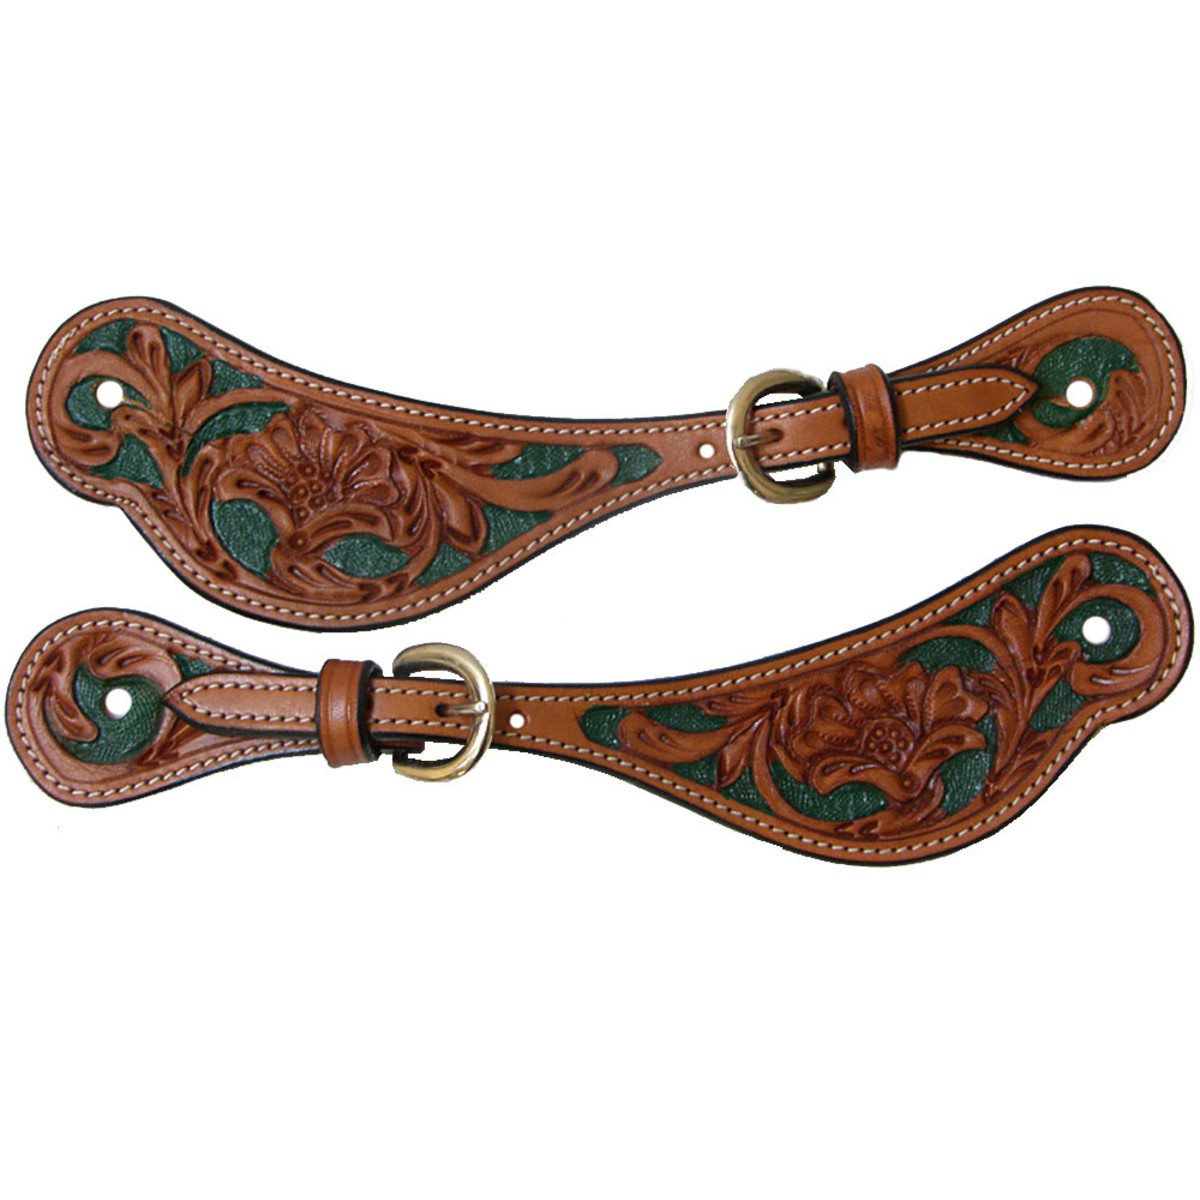 Shaped Leather Floral Tooled Western Spur Straps Show Western Spurs Straps Green Accents